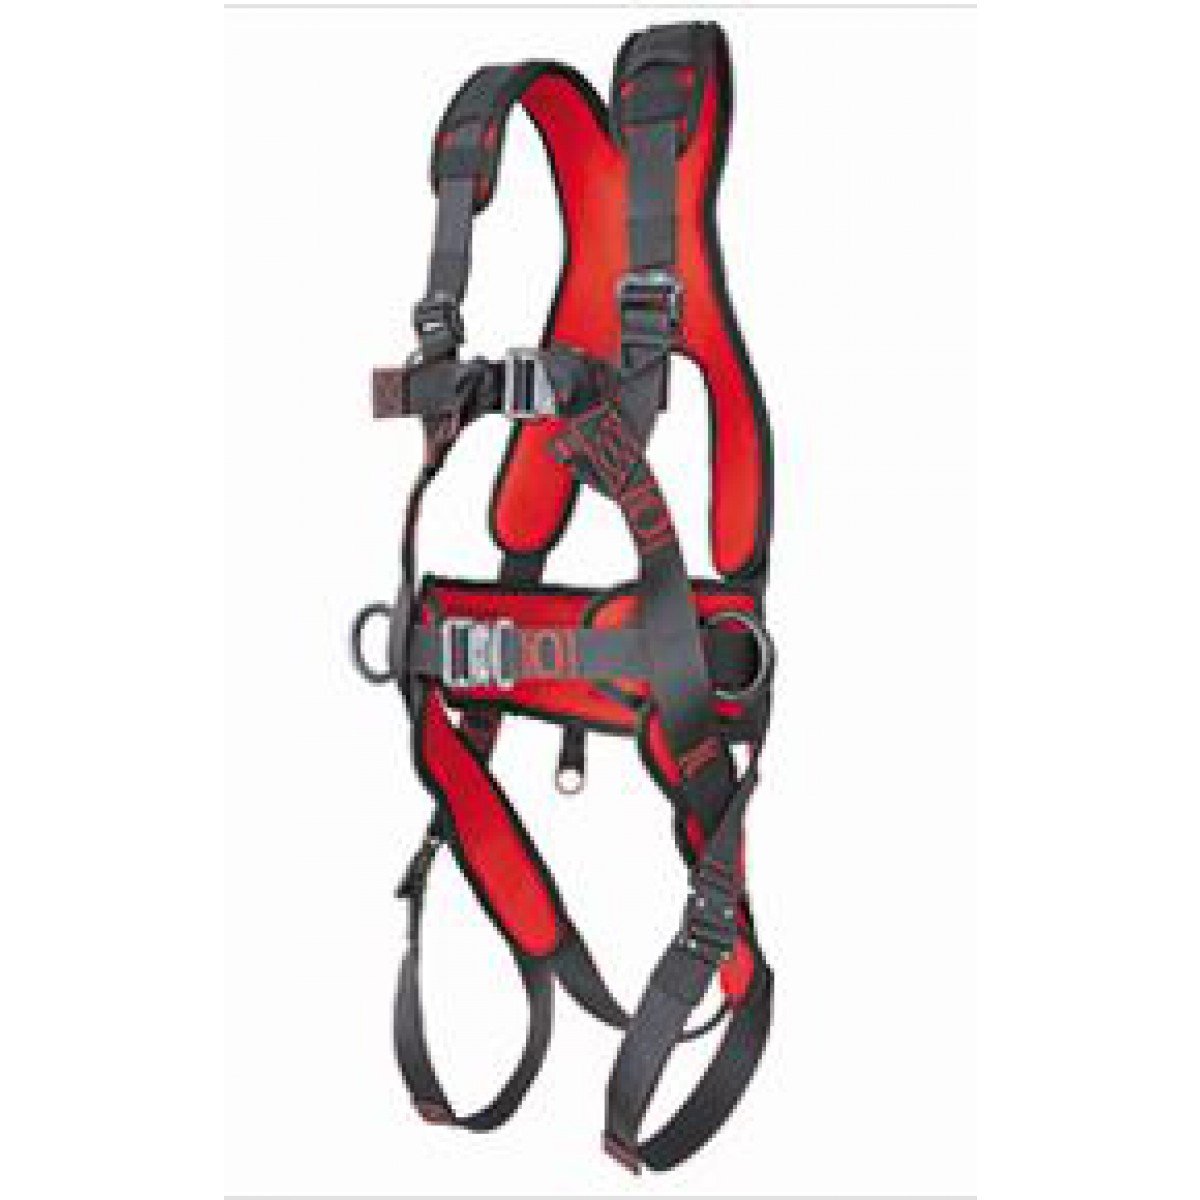 K2 3-Point Harness